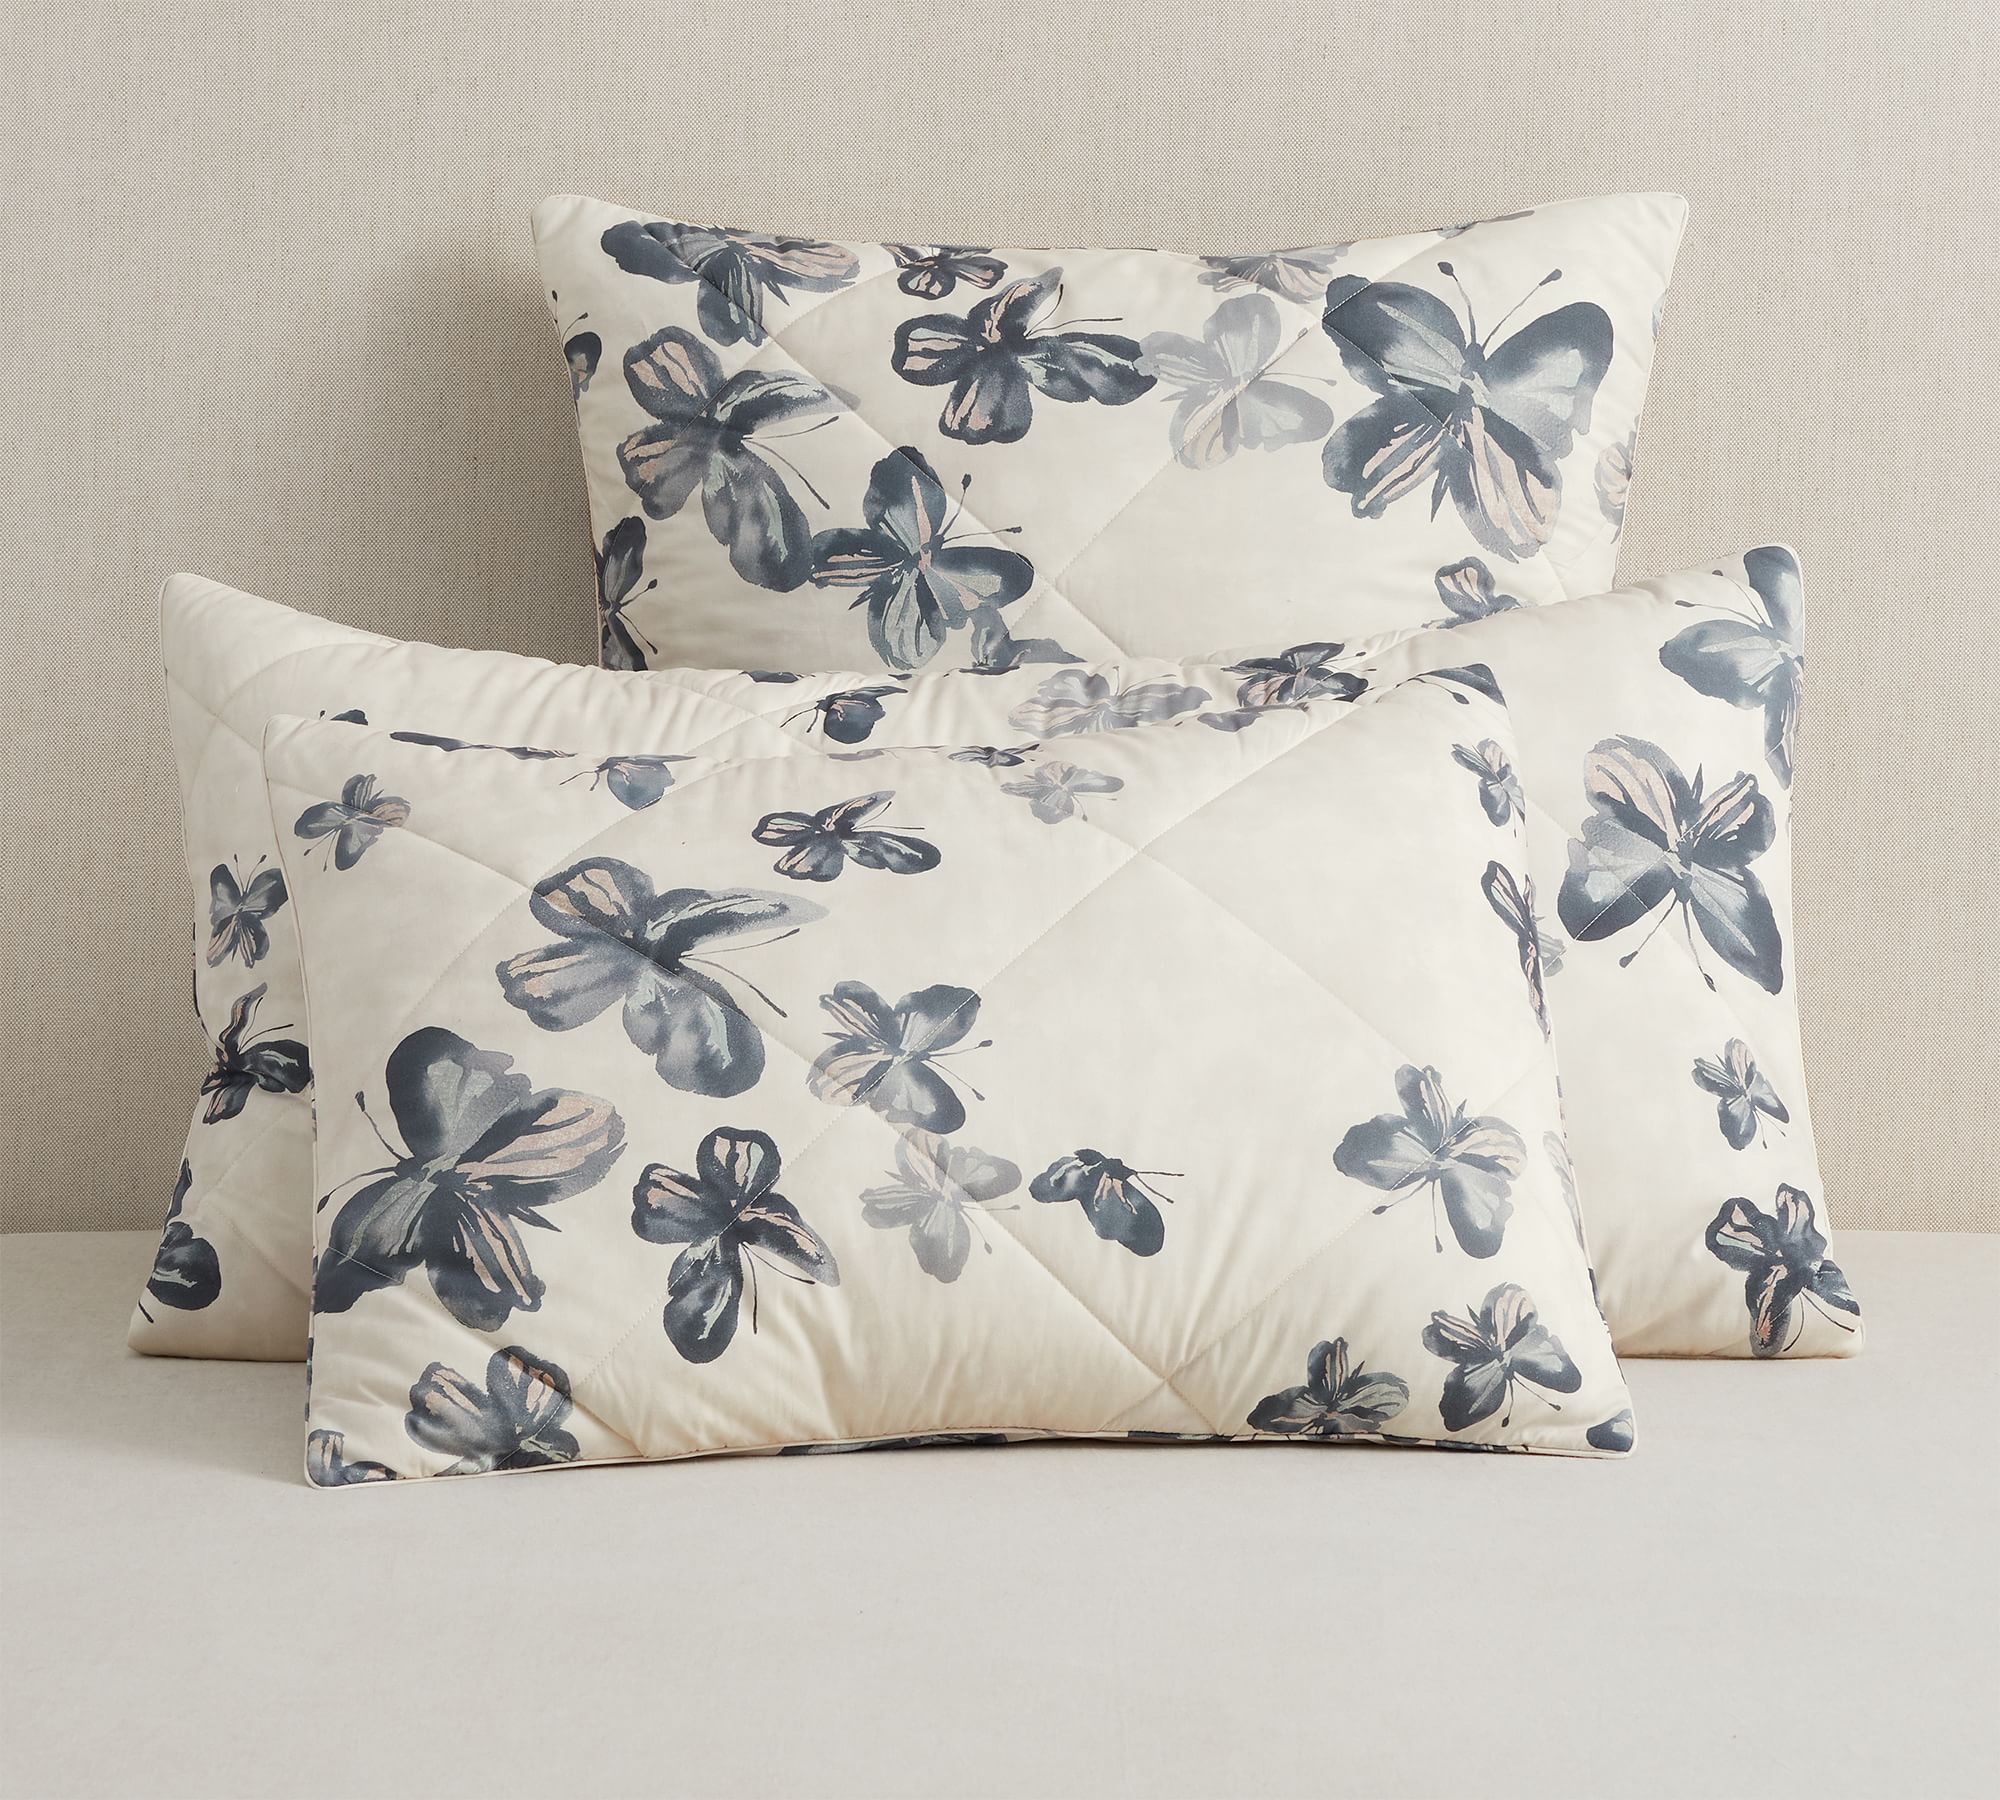 Butterfly Kisses Percale Comforter Sham